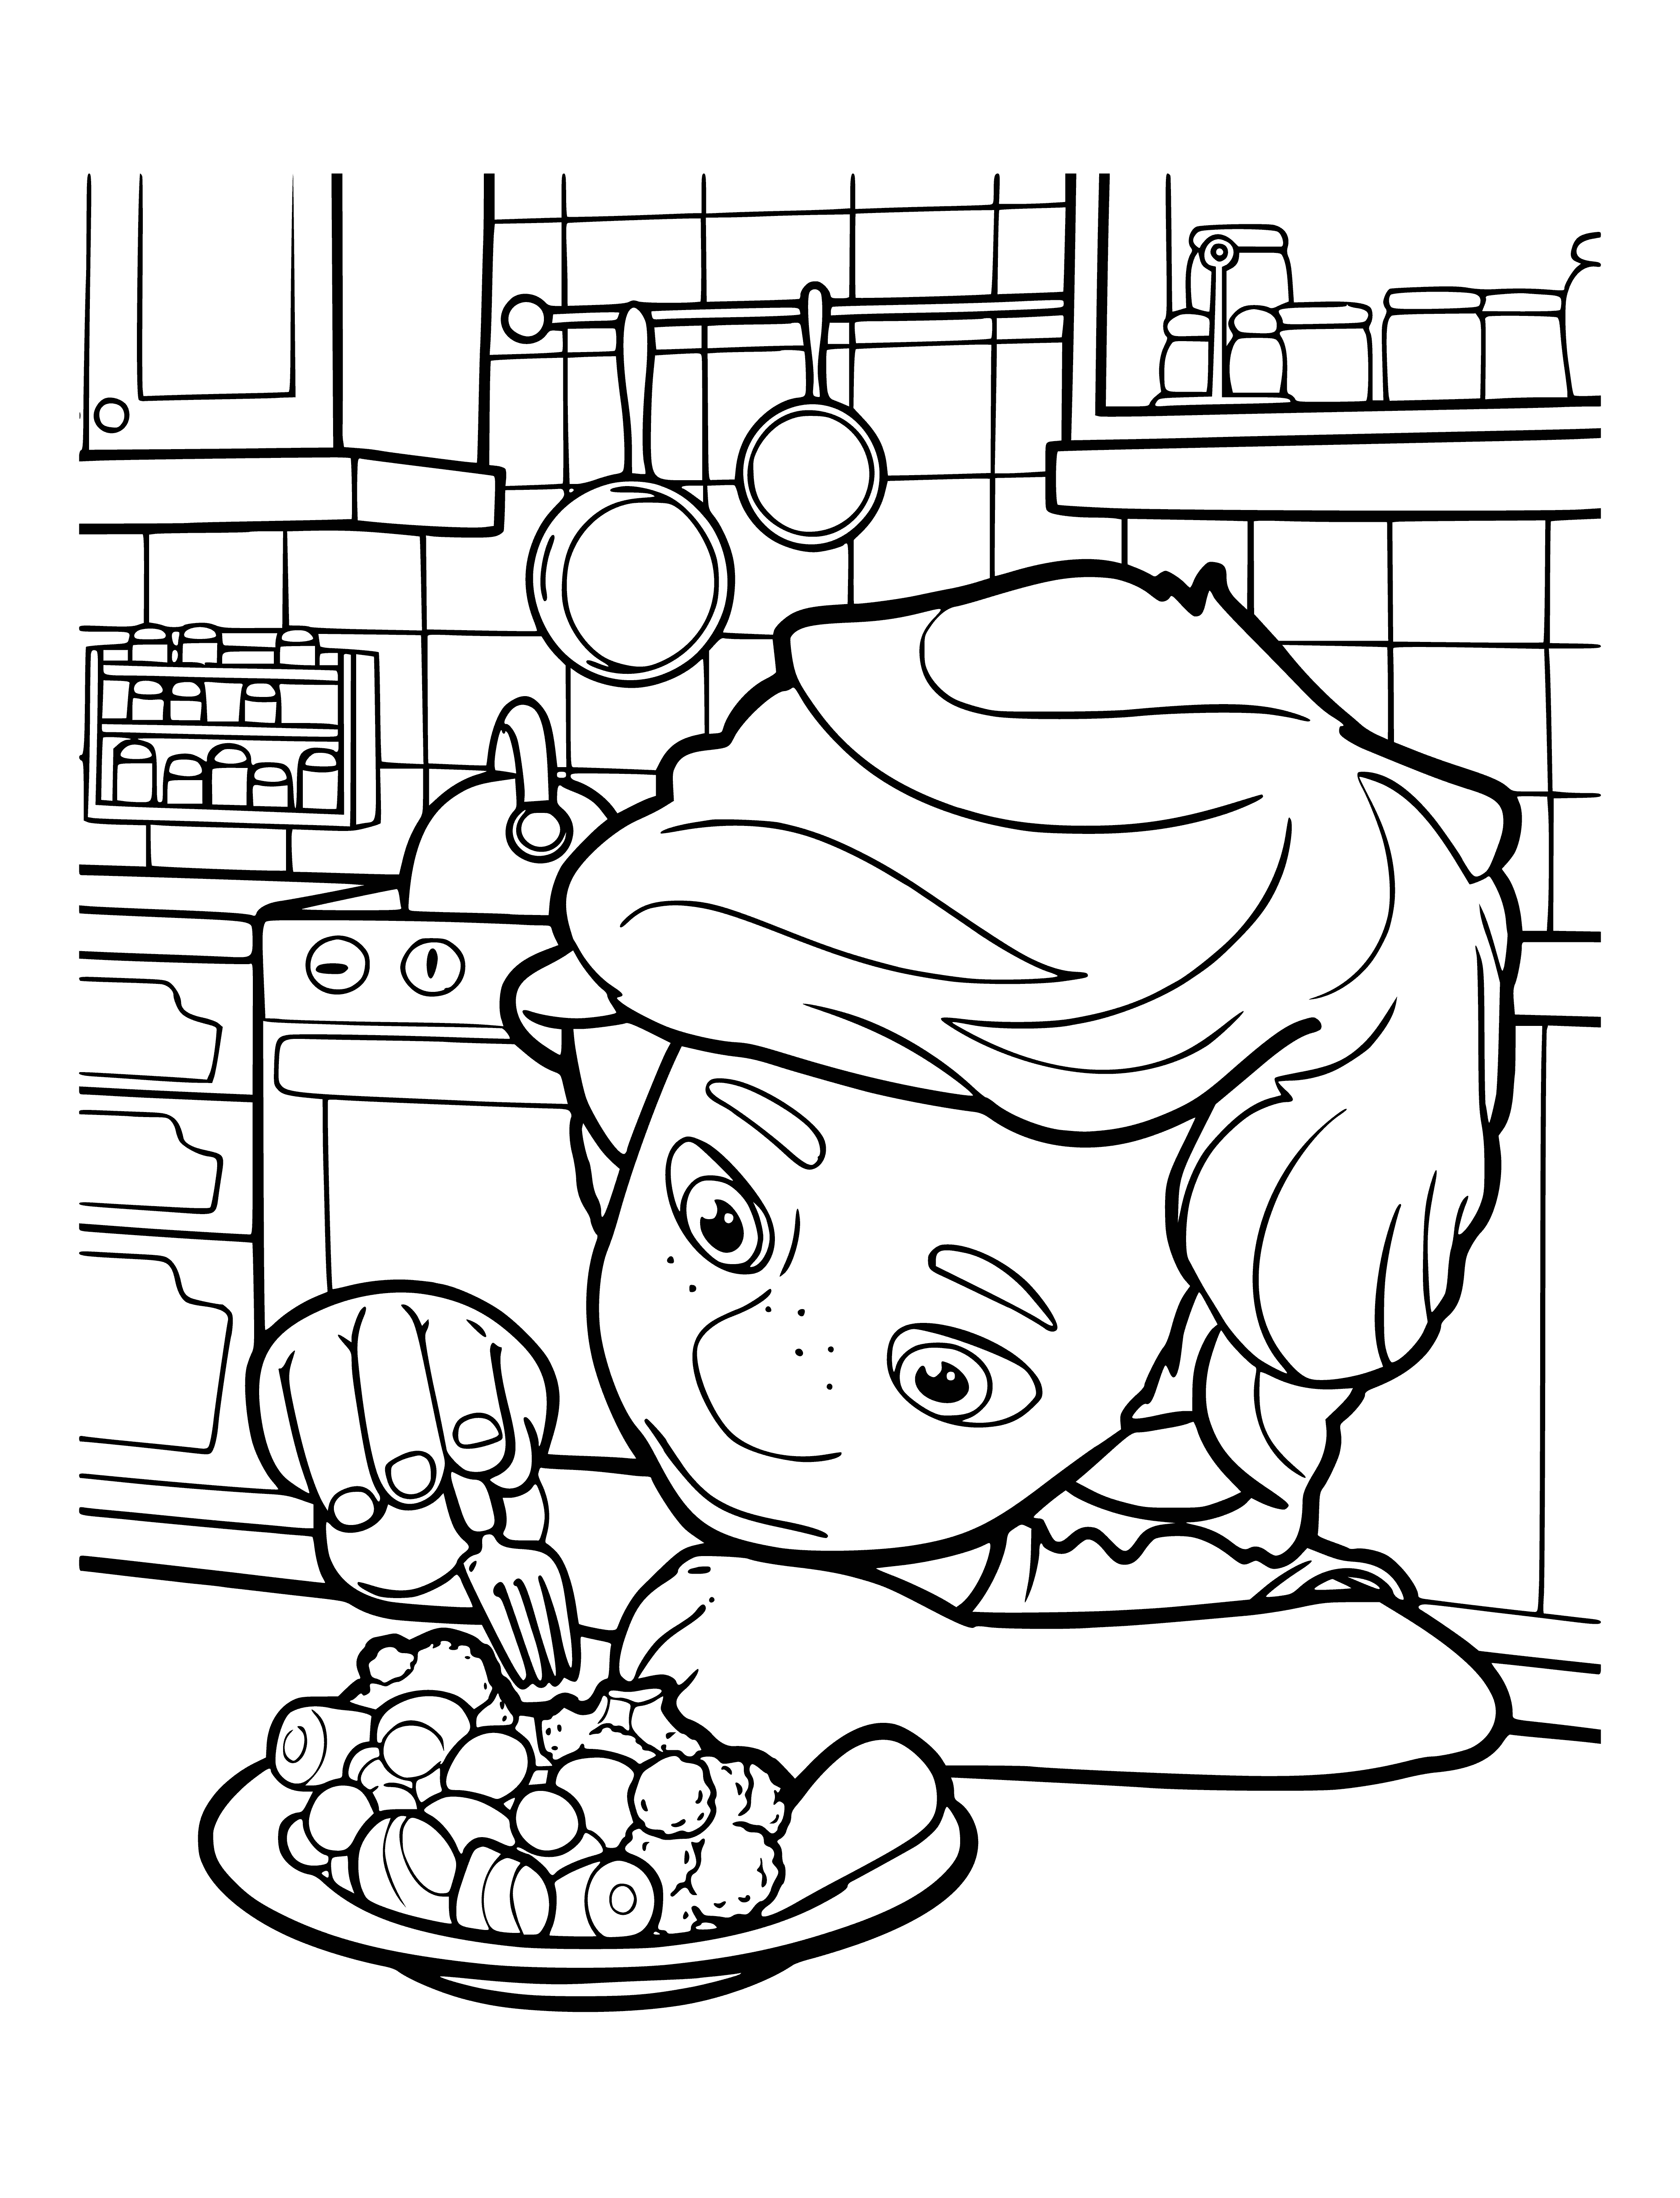 coloring page: Little boy sits at kitchen table picking at a plate of broccoli and mashed potatoes.